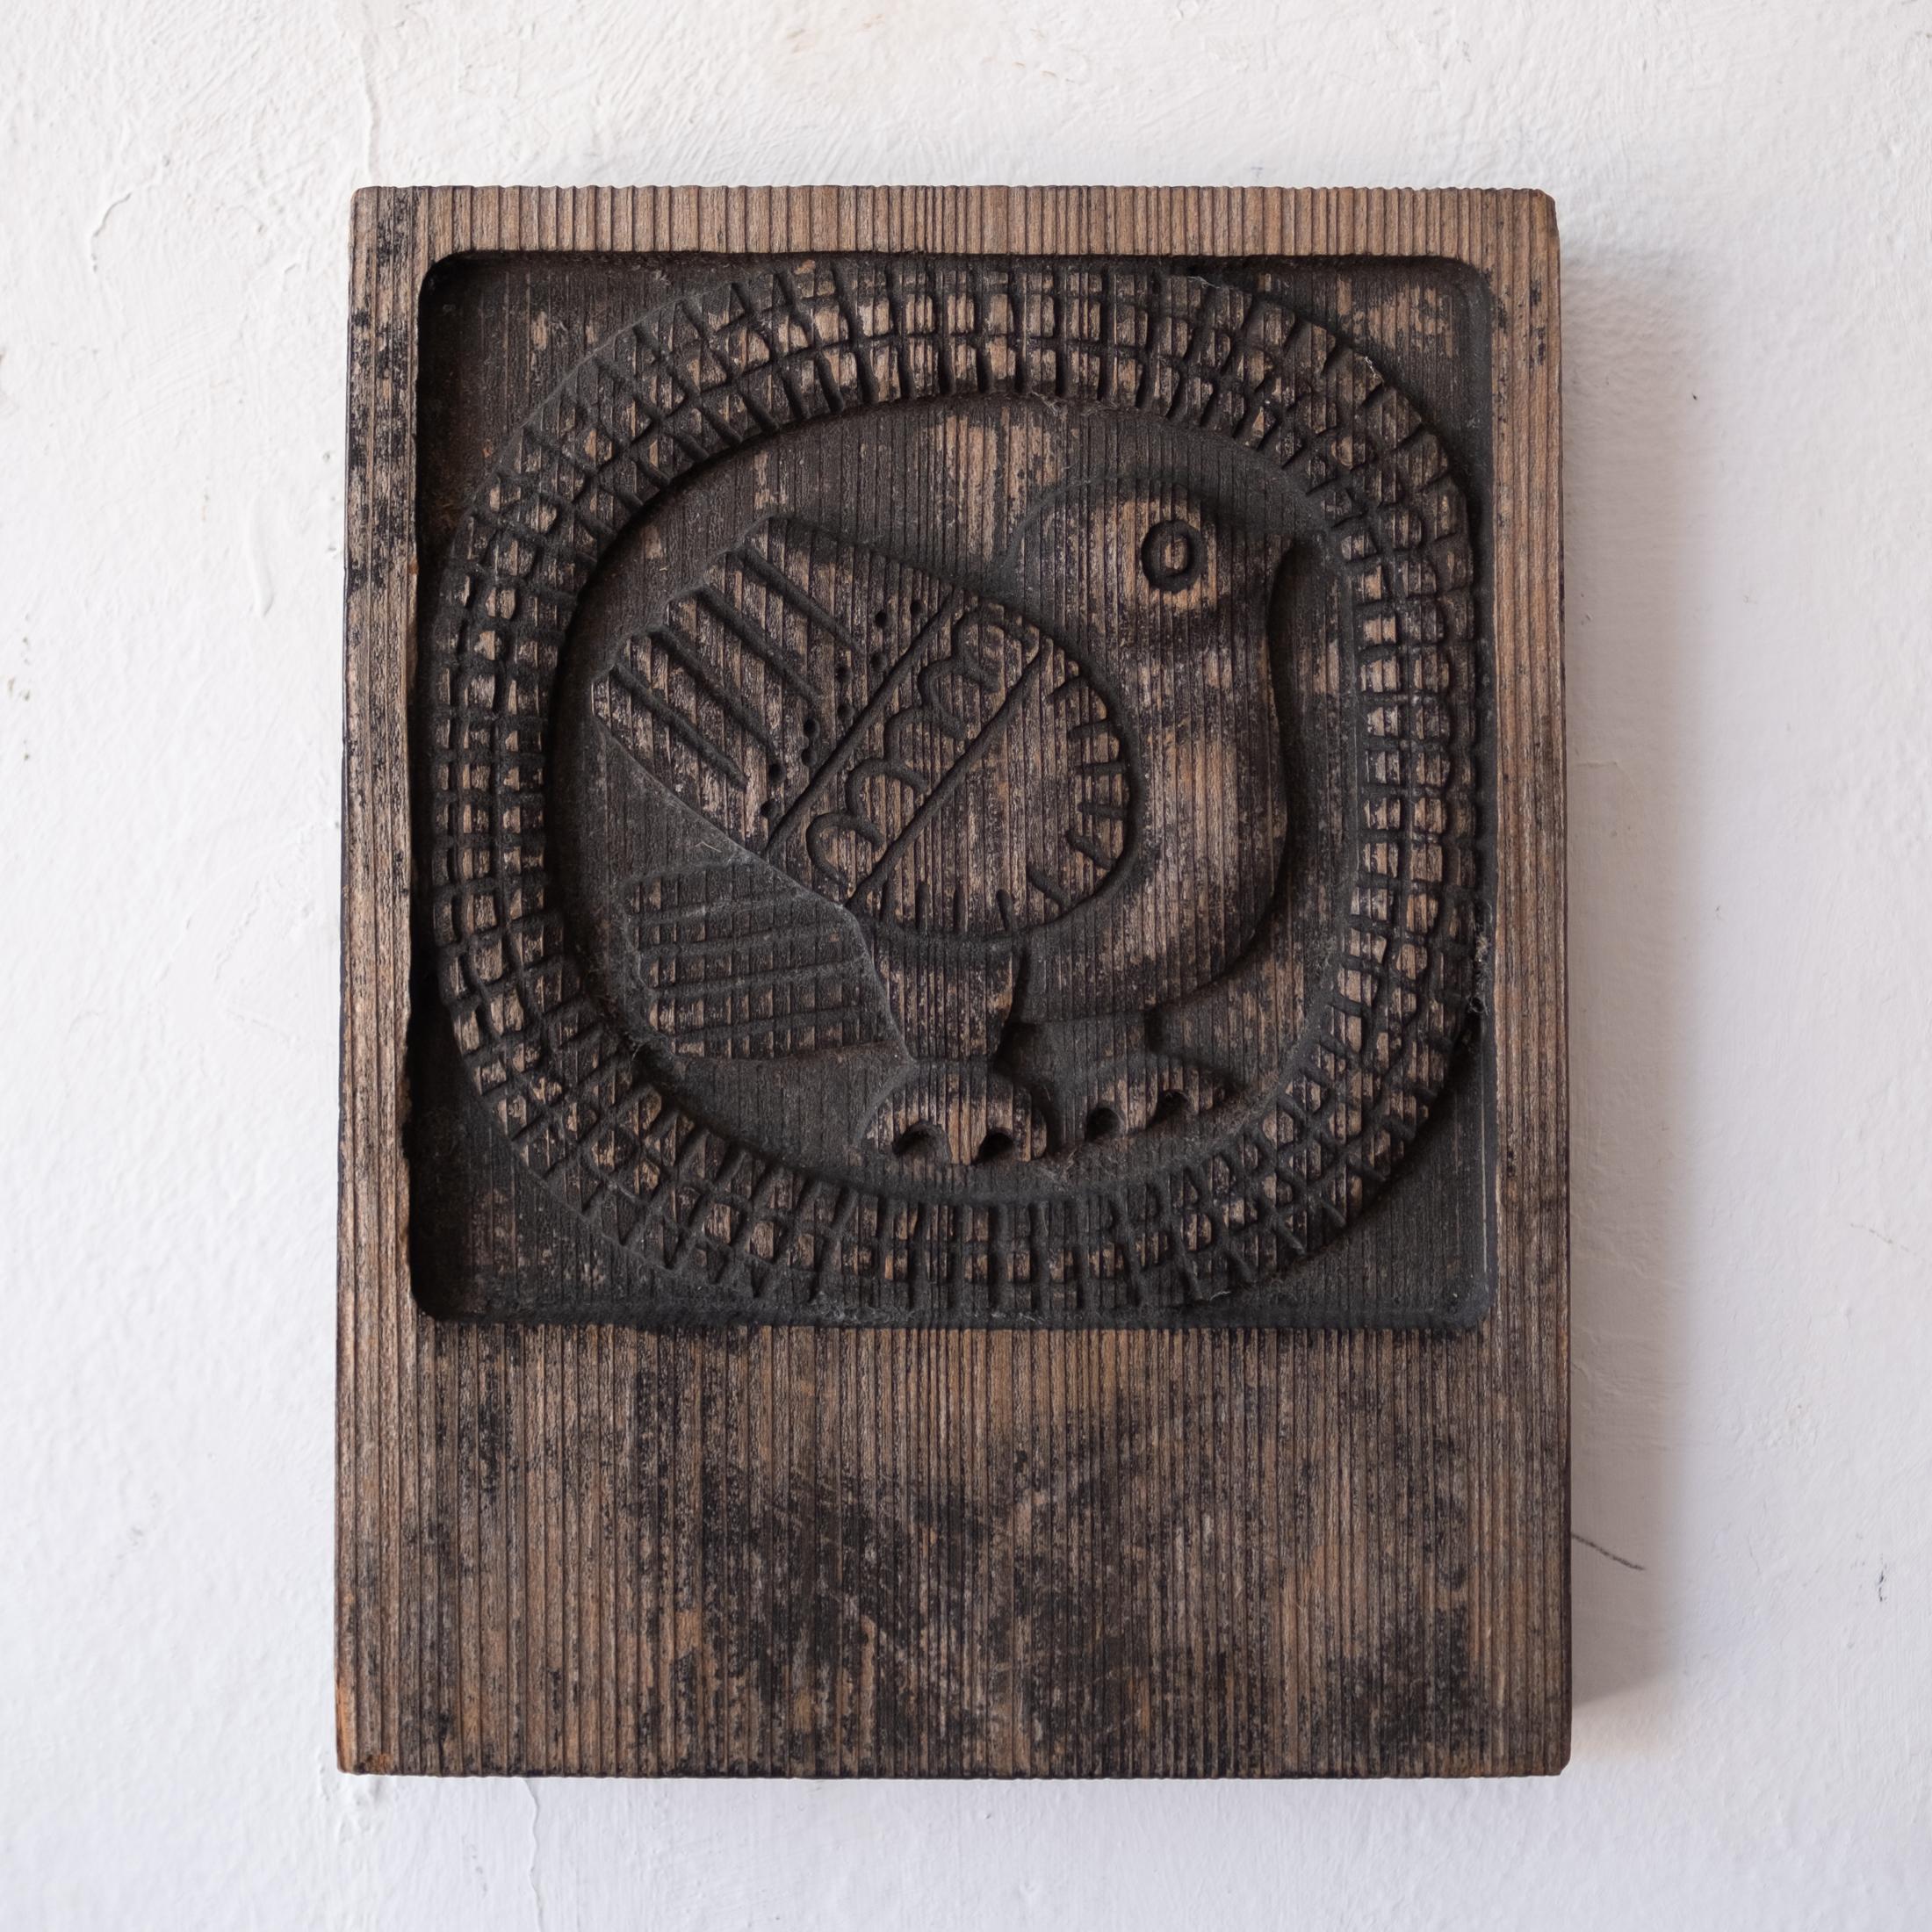 Sculptural wood wall plaque by Evelyn Ackerman for her and Jerome Ackerman's company, ERA. It has a wonderful patina and includes a hanging bracket on the back. 

Evelyn Ackerman was born on January 12, 1924 in Detroit, Michigan. She graduated